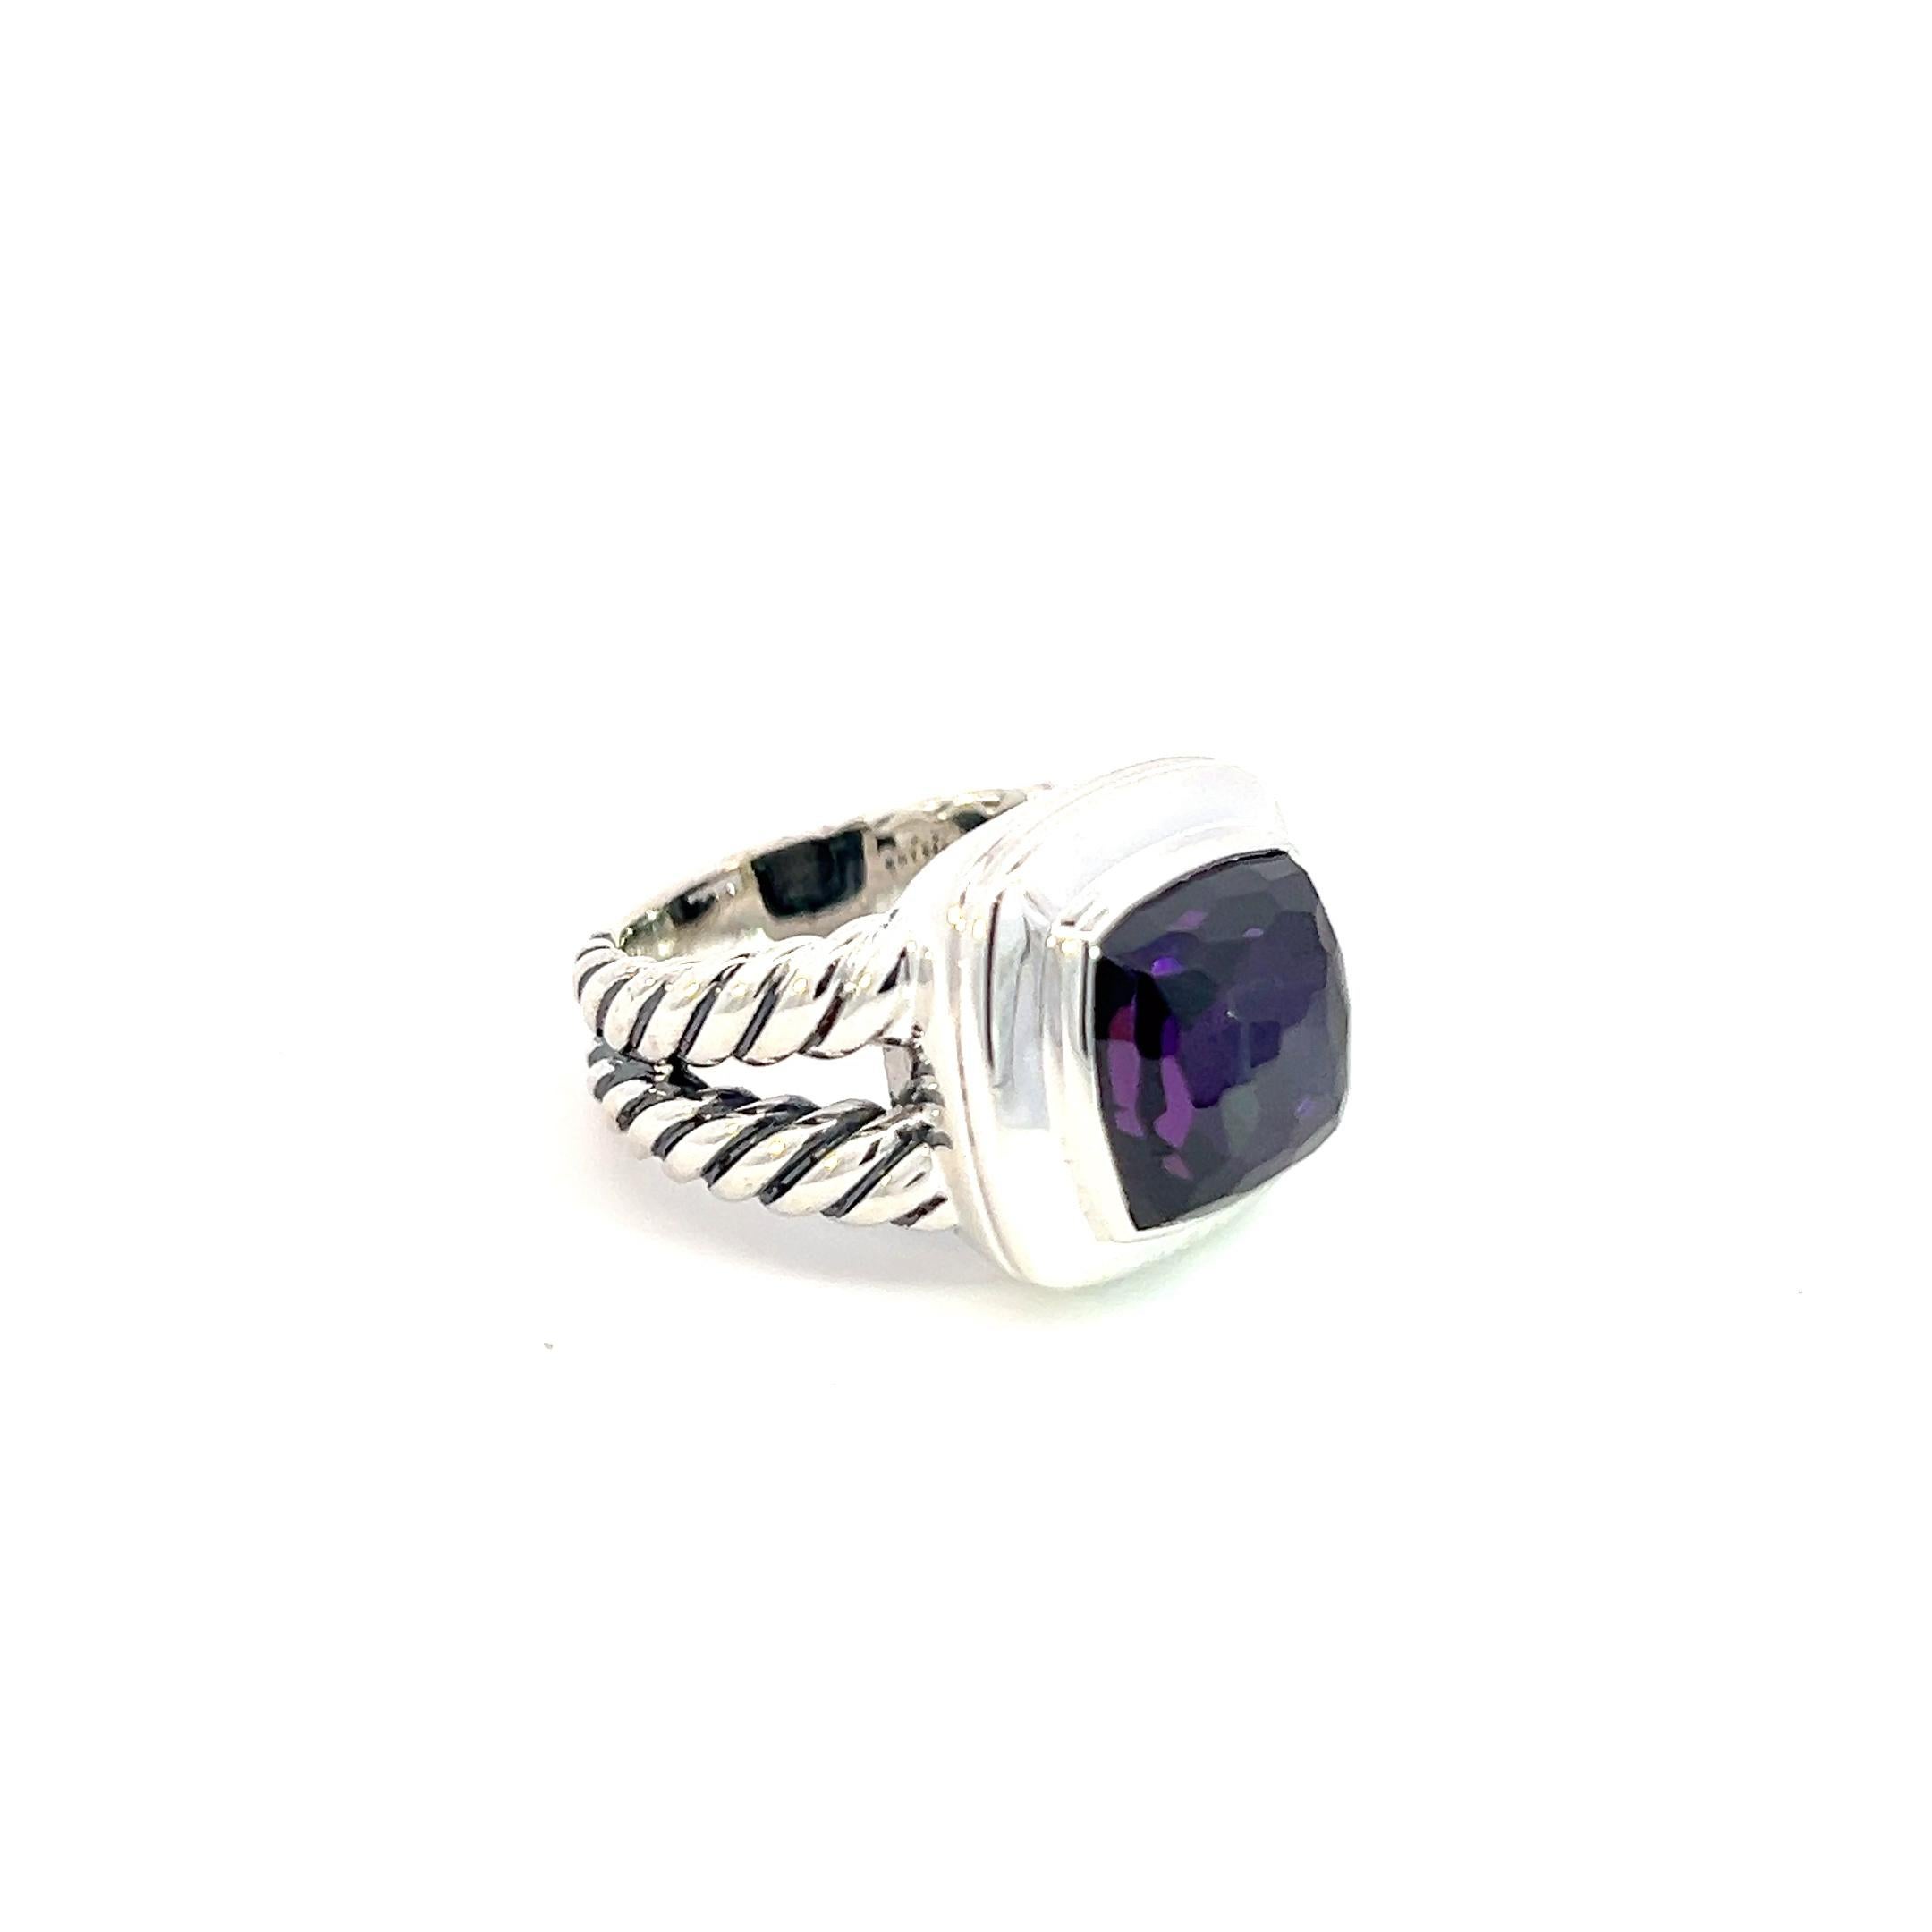 David Yurman Authentic Estate Black Orquid Albion Ring 6 Silver 11 mm In Good Condition For Sale In Brooklyn, NY